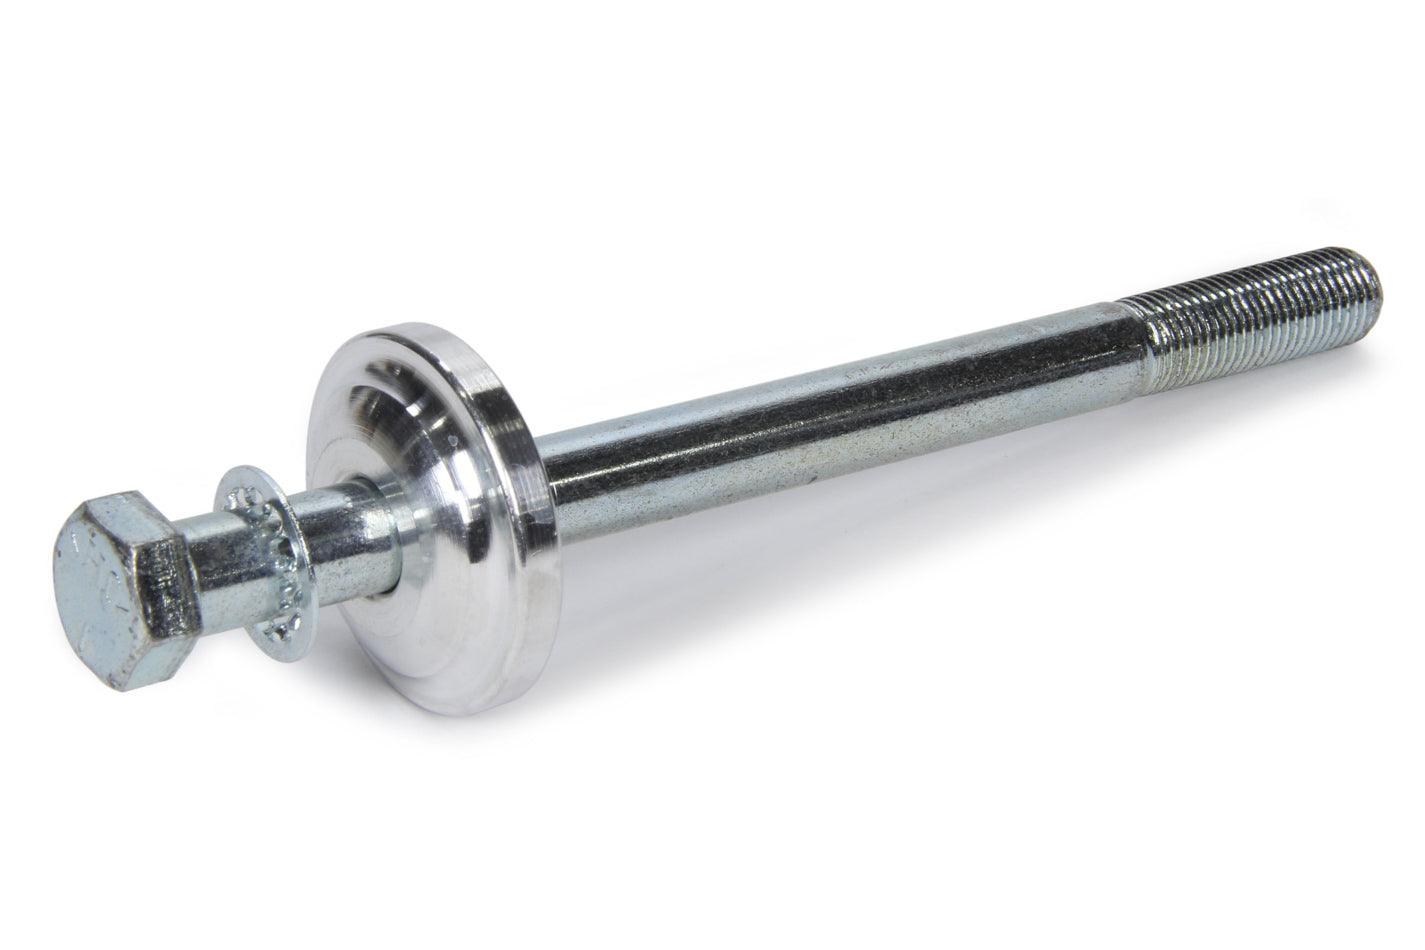 6.0in long Bolt 7/16in Diameter w/ End Cap - Burlile Performance Products